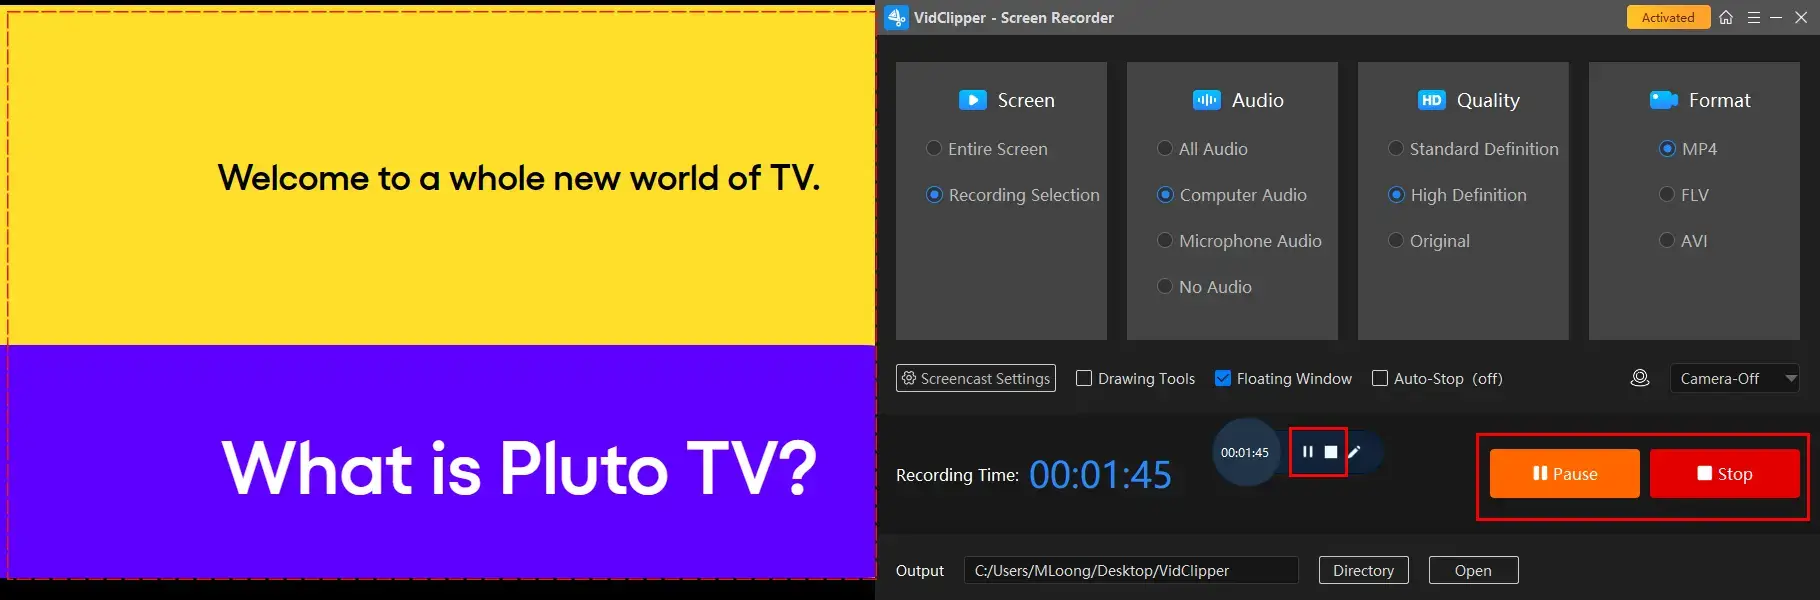 how to record pluto tv on windows with workintool capture screen recorder